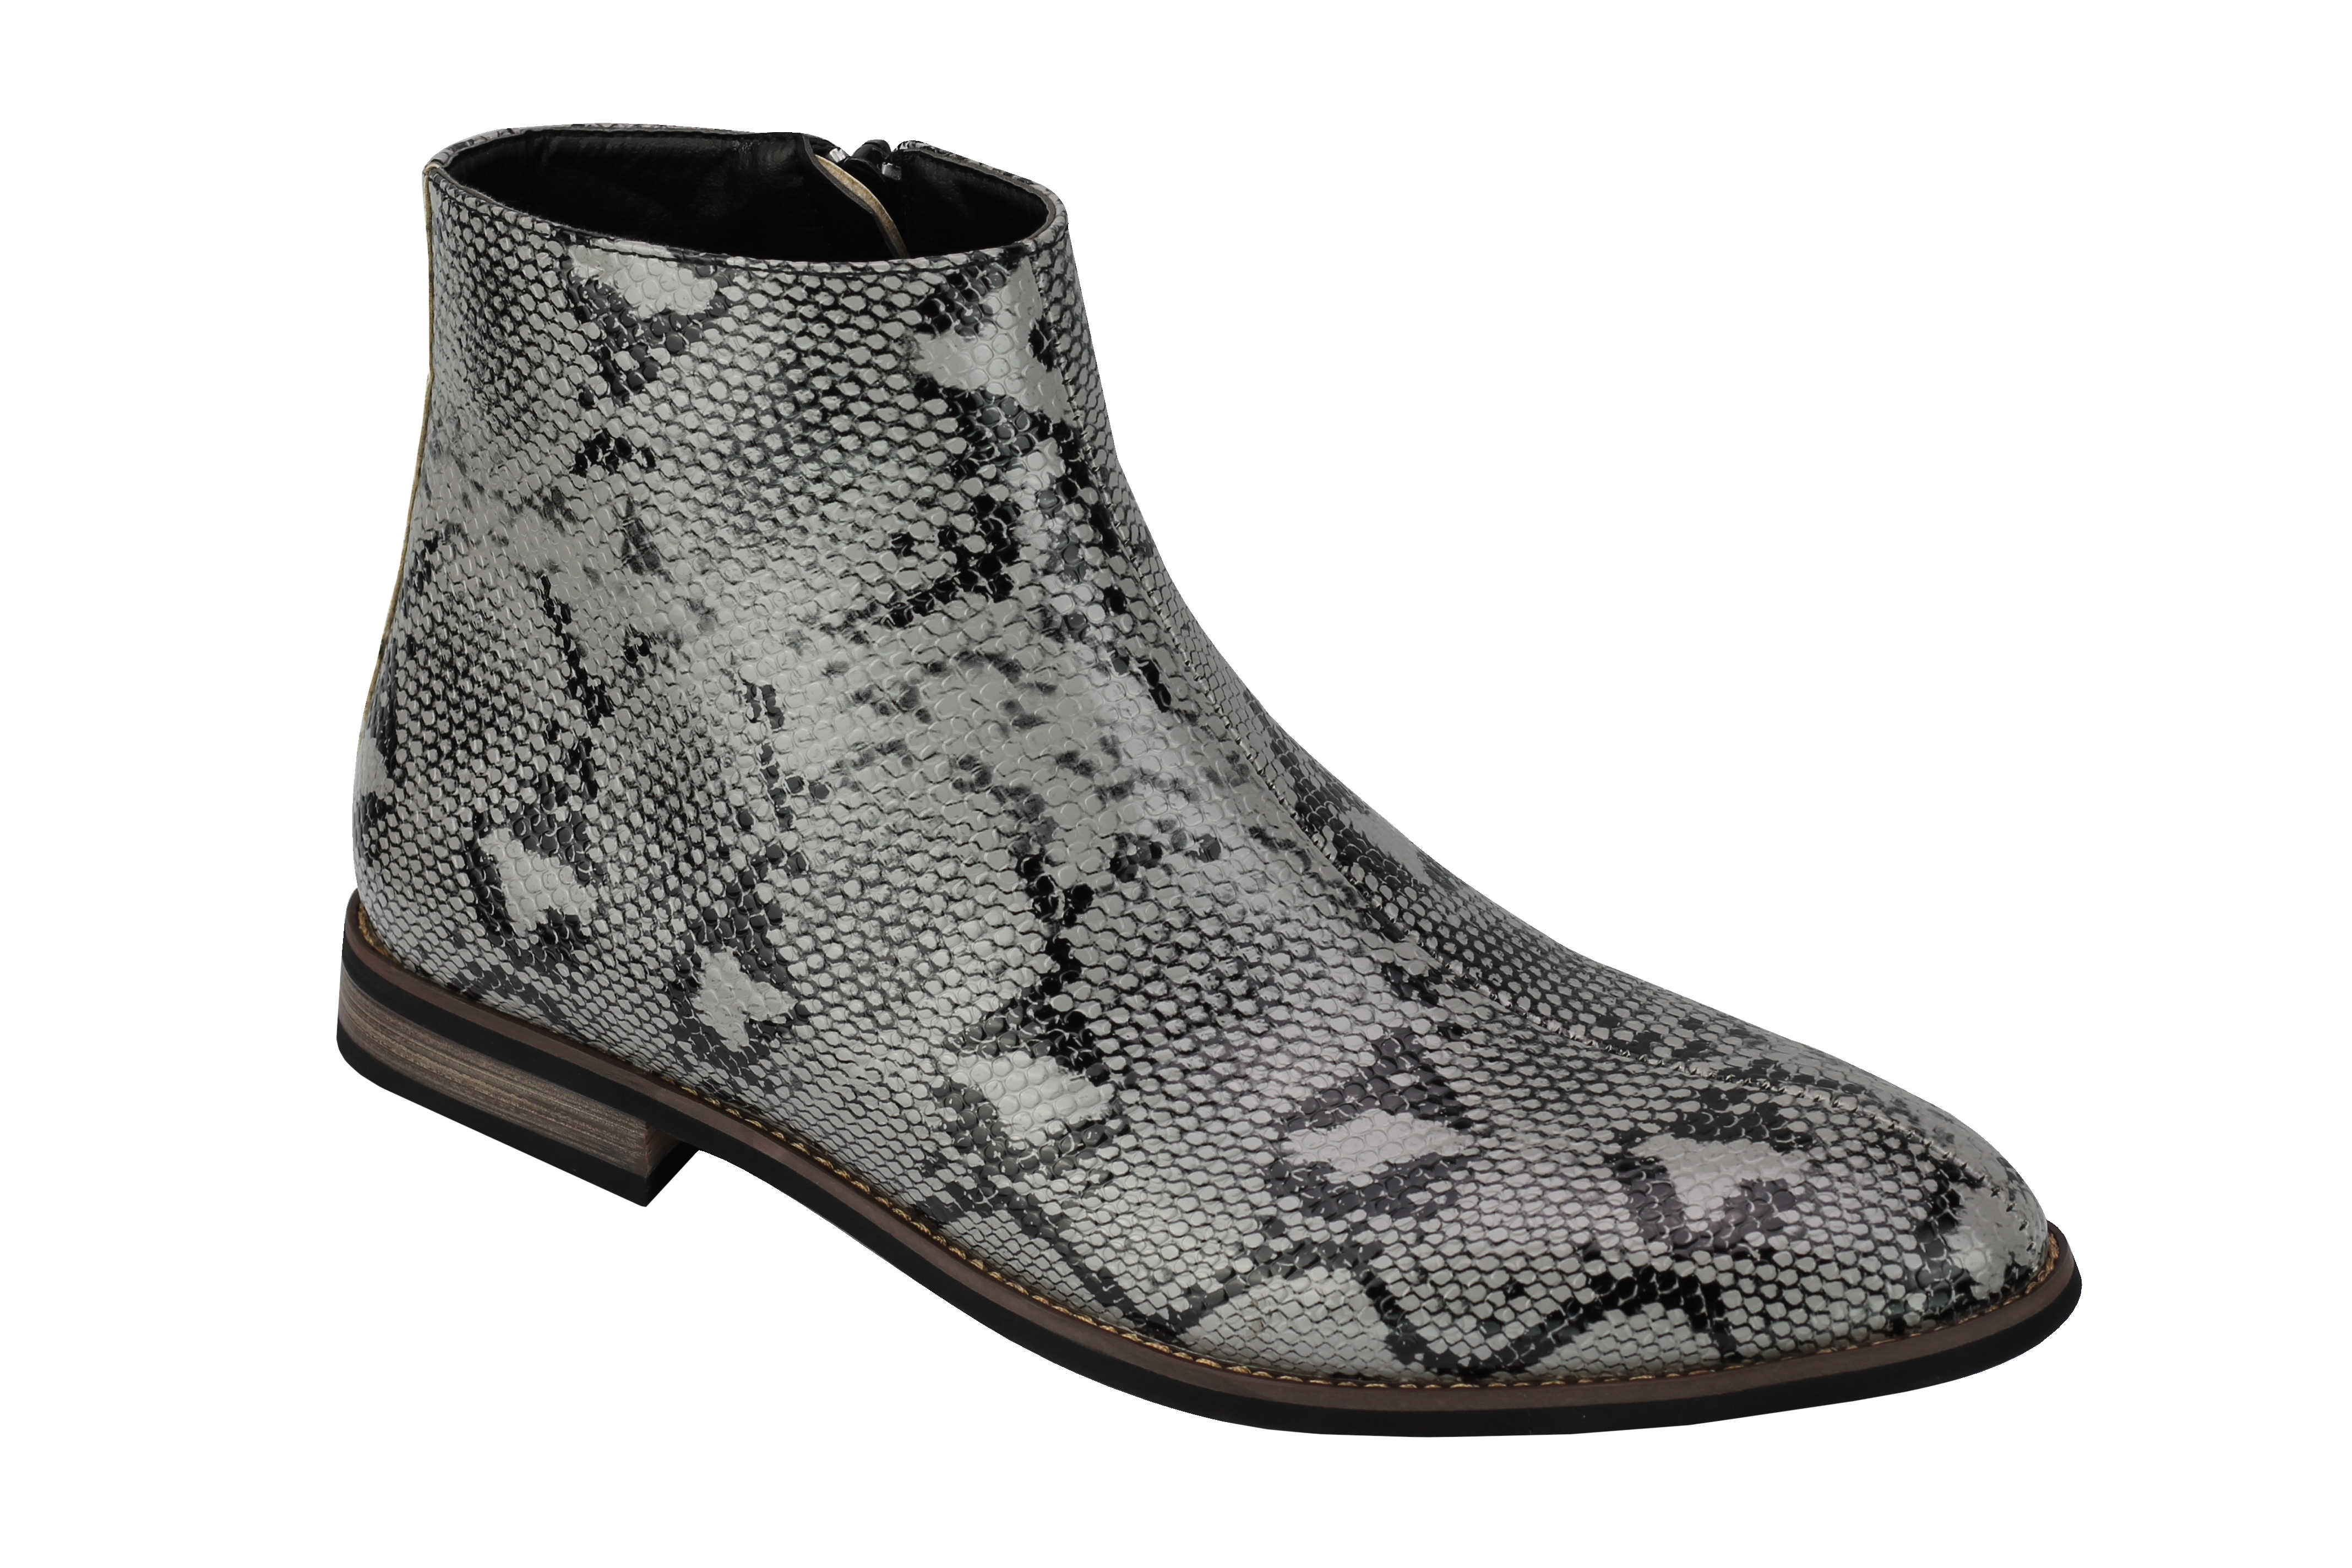 Mens Faux Leather Shiny Snake skin Print Ankle Boots on Chelsea Shoes | eBay